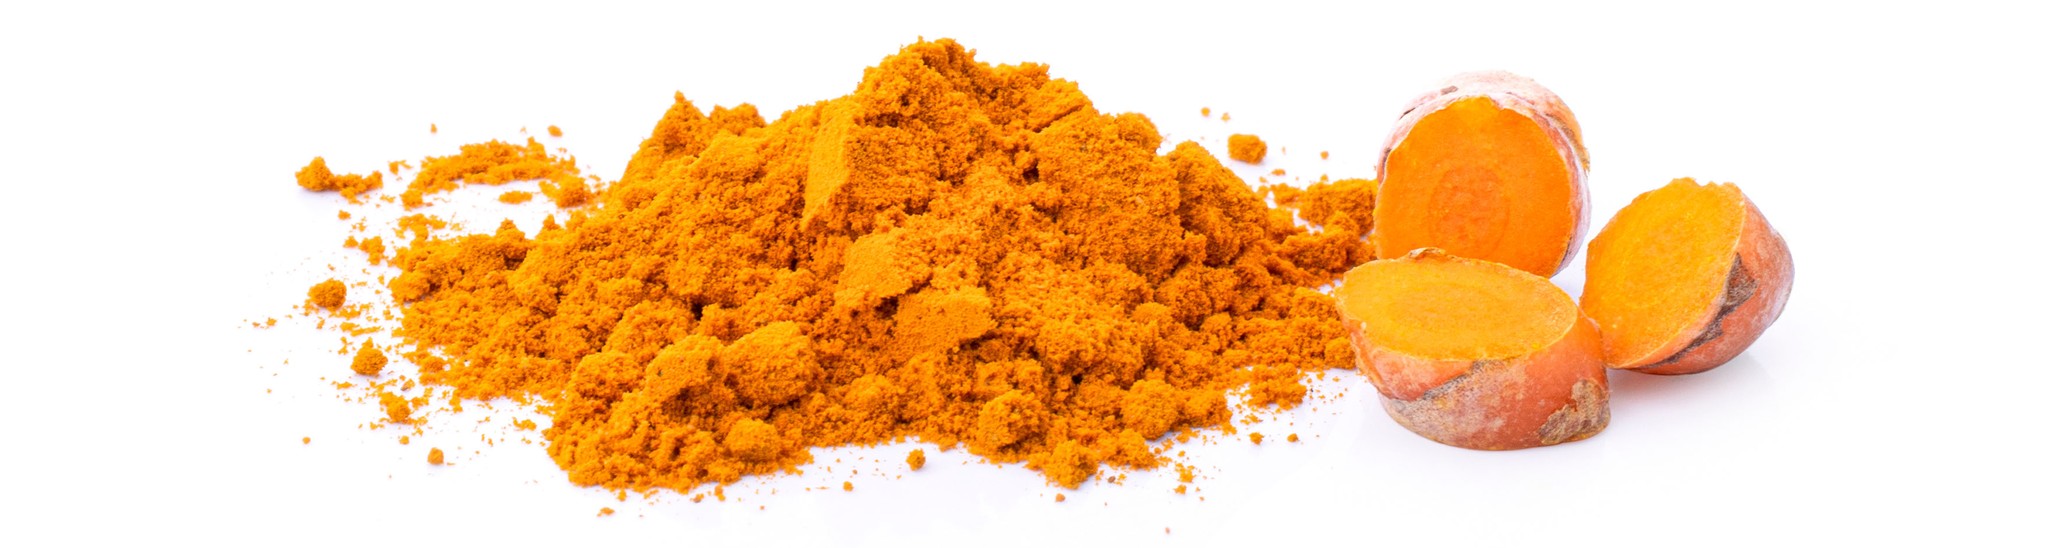 A pile of turmeric powder with 3 hunks of chopped turmeric root to the right of the pile